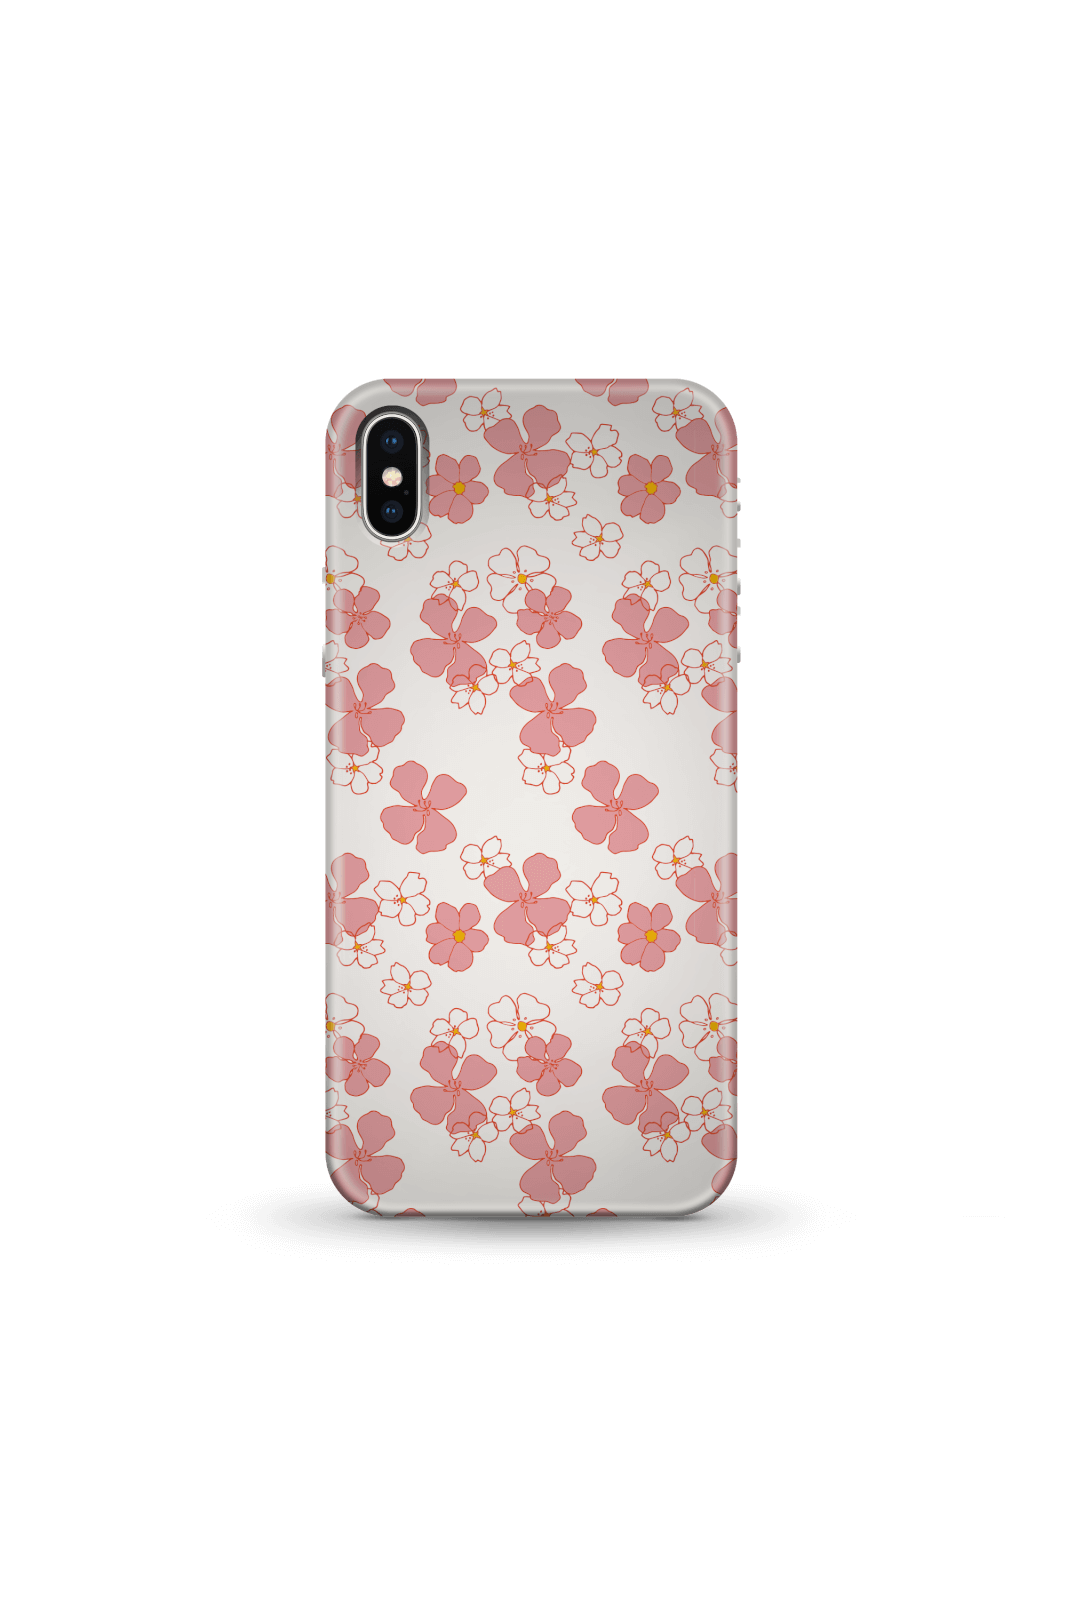 Floral Retro Phone Case for iPhone and Android - iPhone 5/5s - Snap Case - Matte